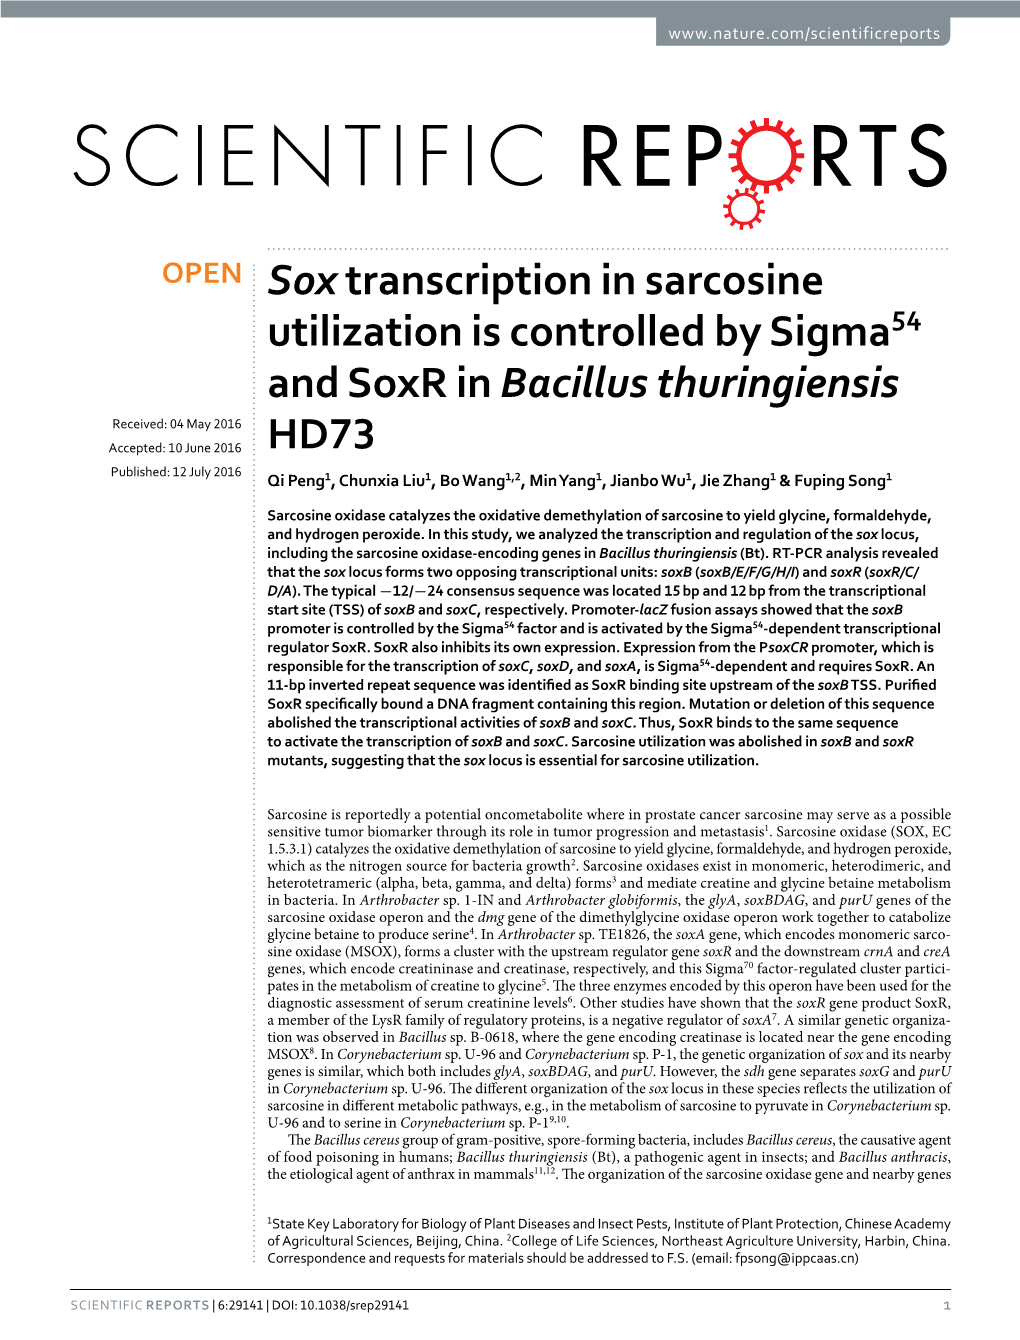 Sox Transcription in Sarcosine Utilization Is Controlled by Sigma54